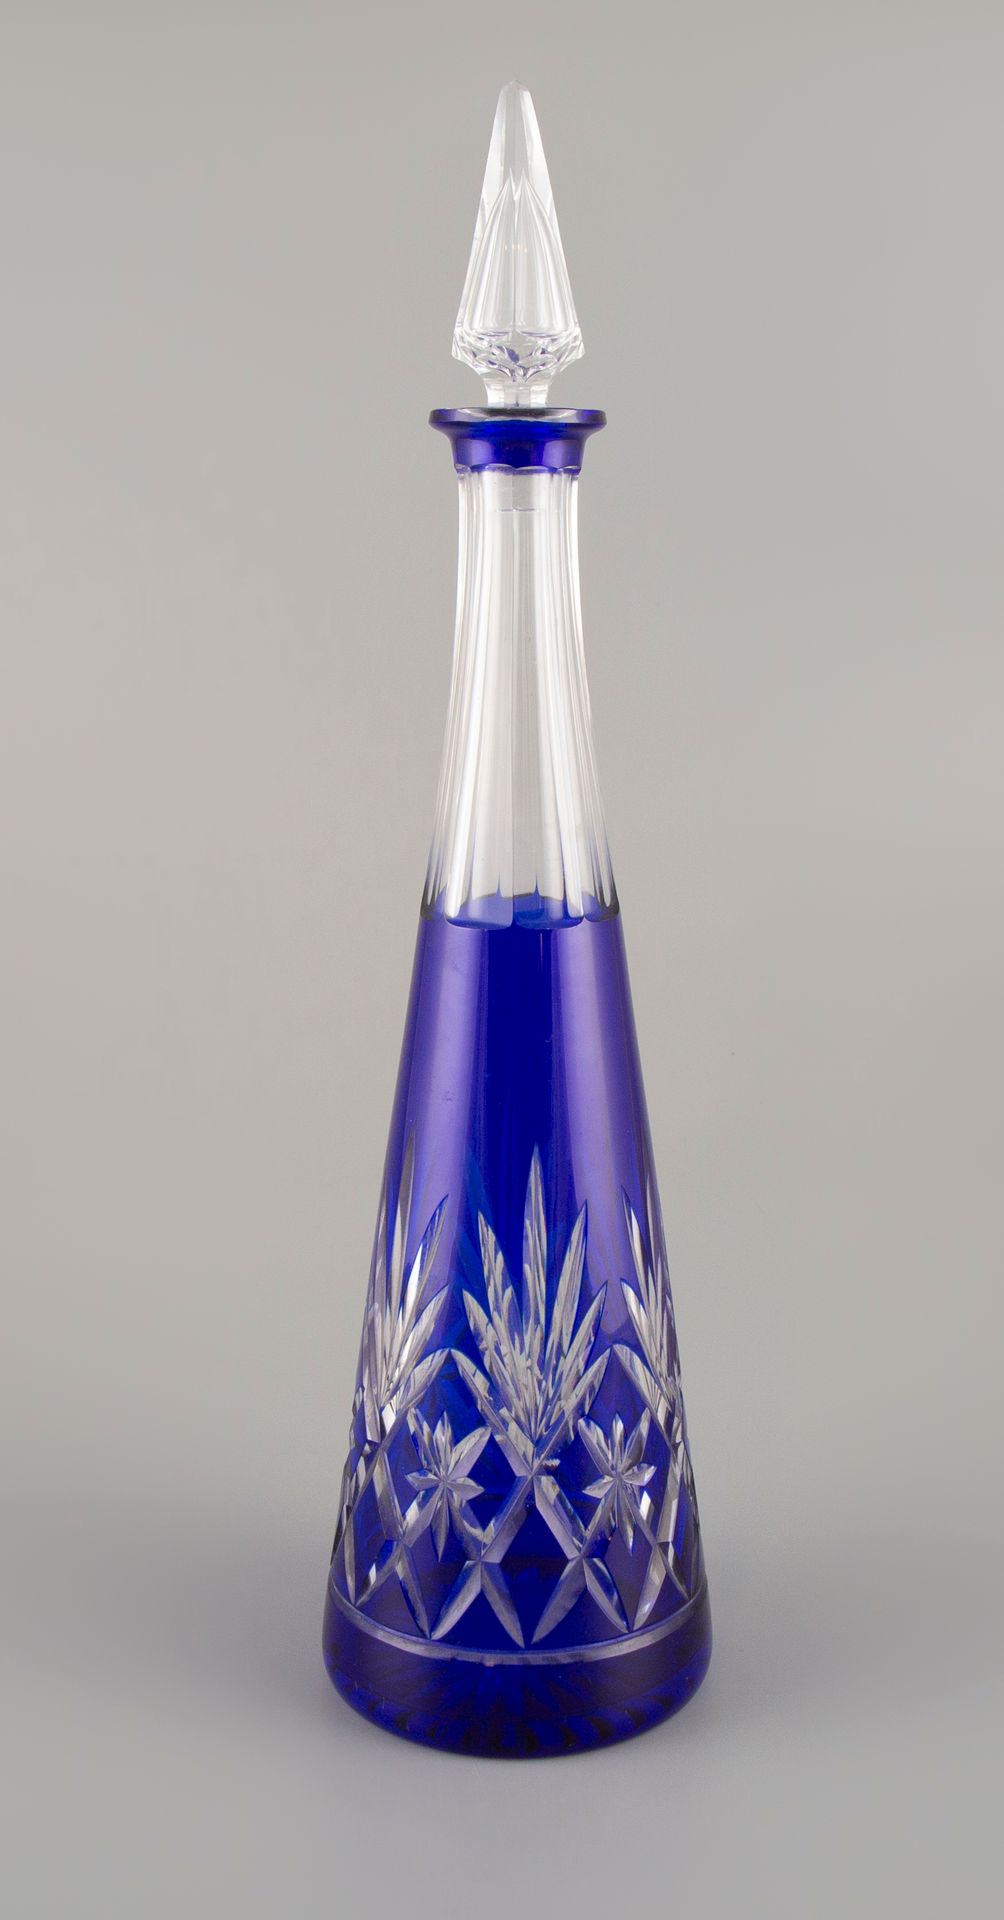 Null Crystal of Bohemia. Decanter and its blue cut crystal stopper.